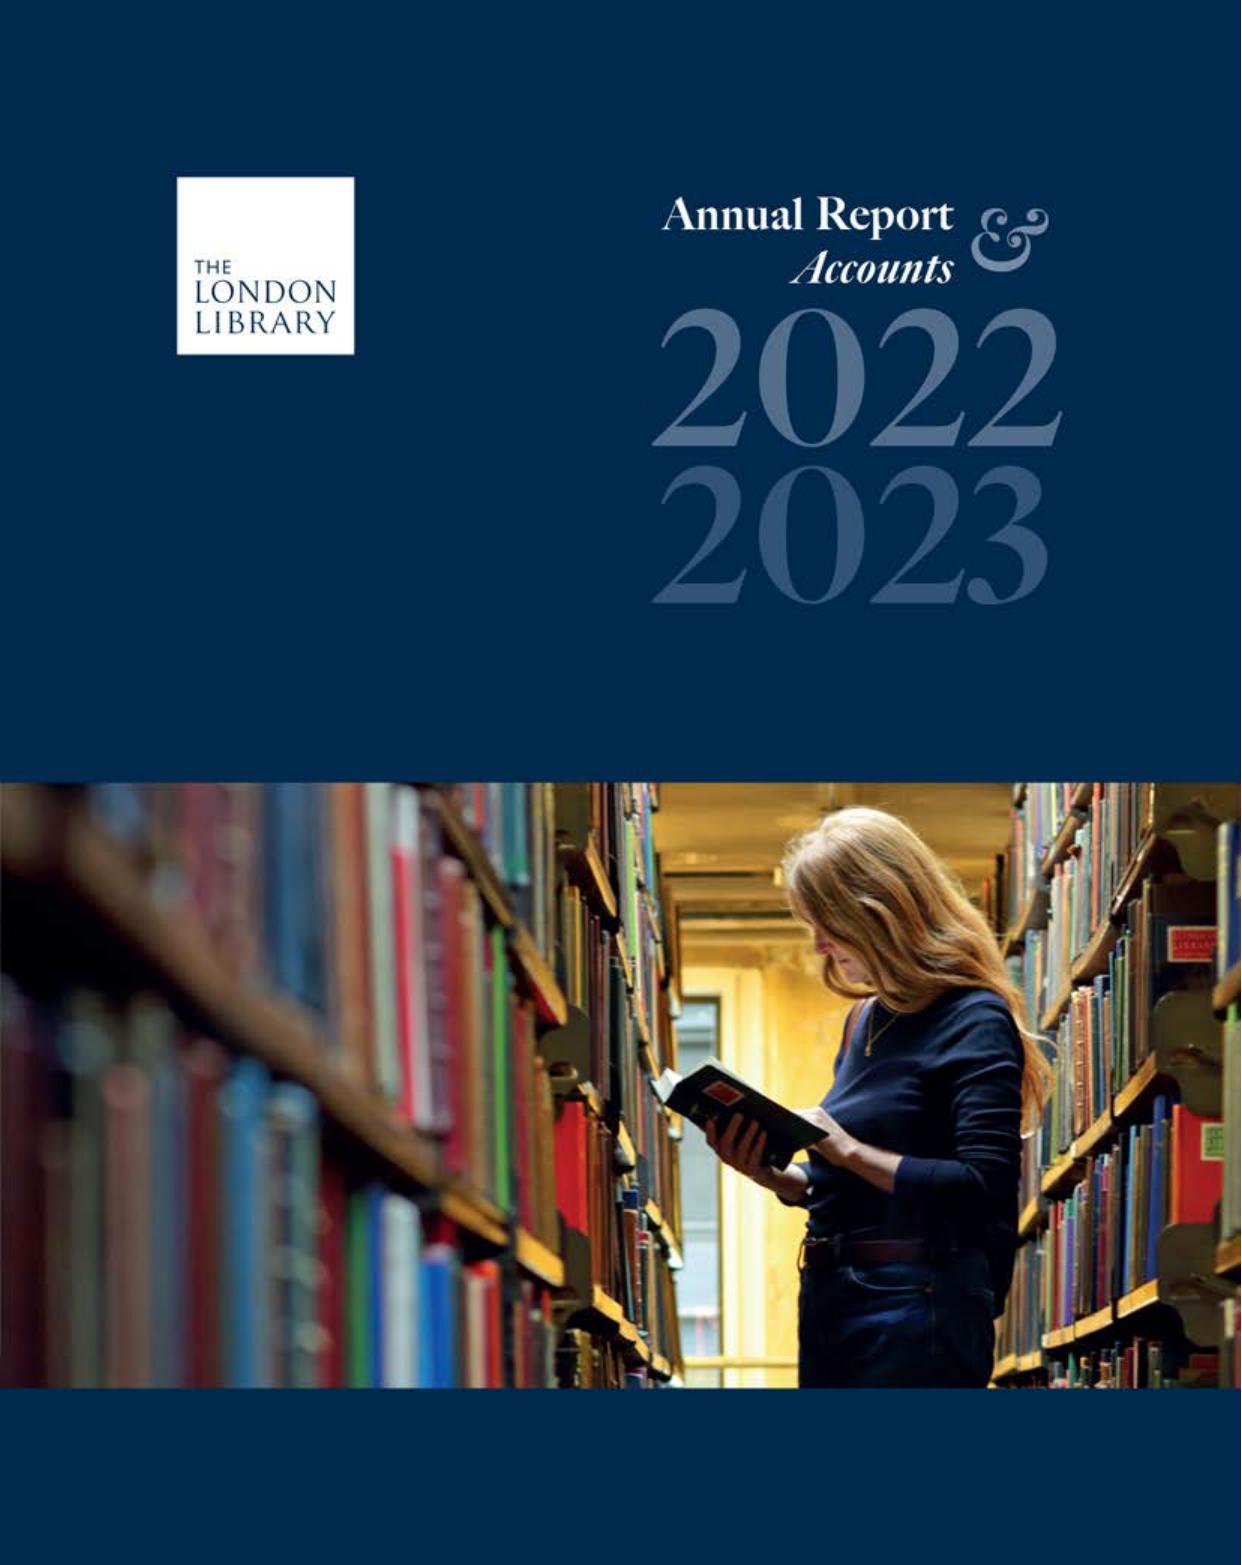 LONDONLIBRARY 2022 Annual Report